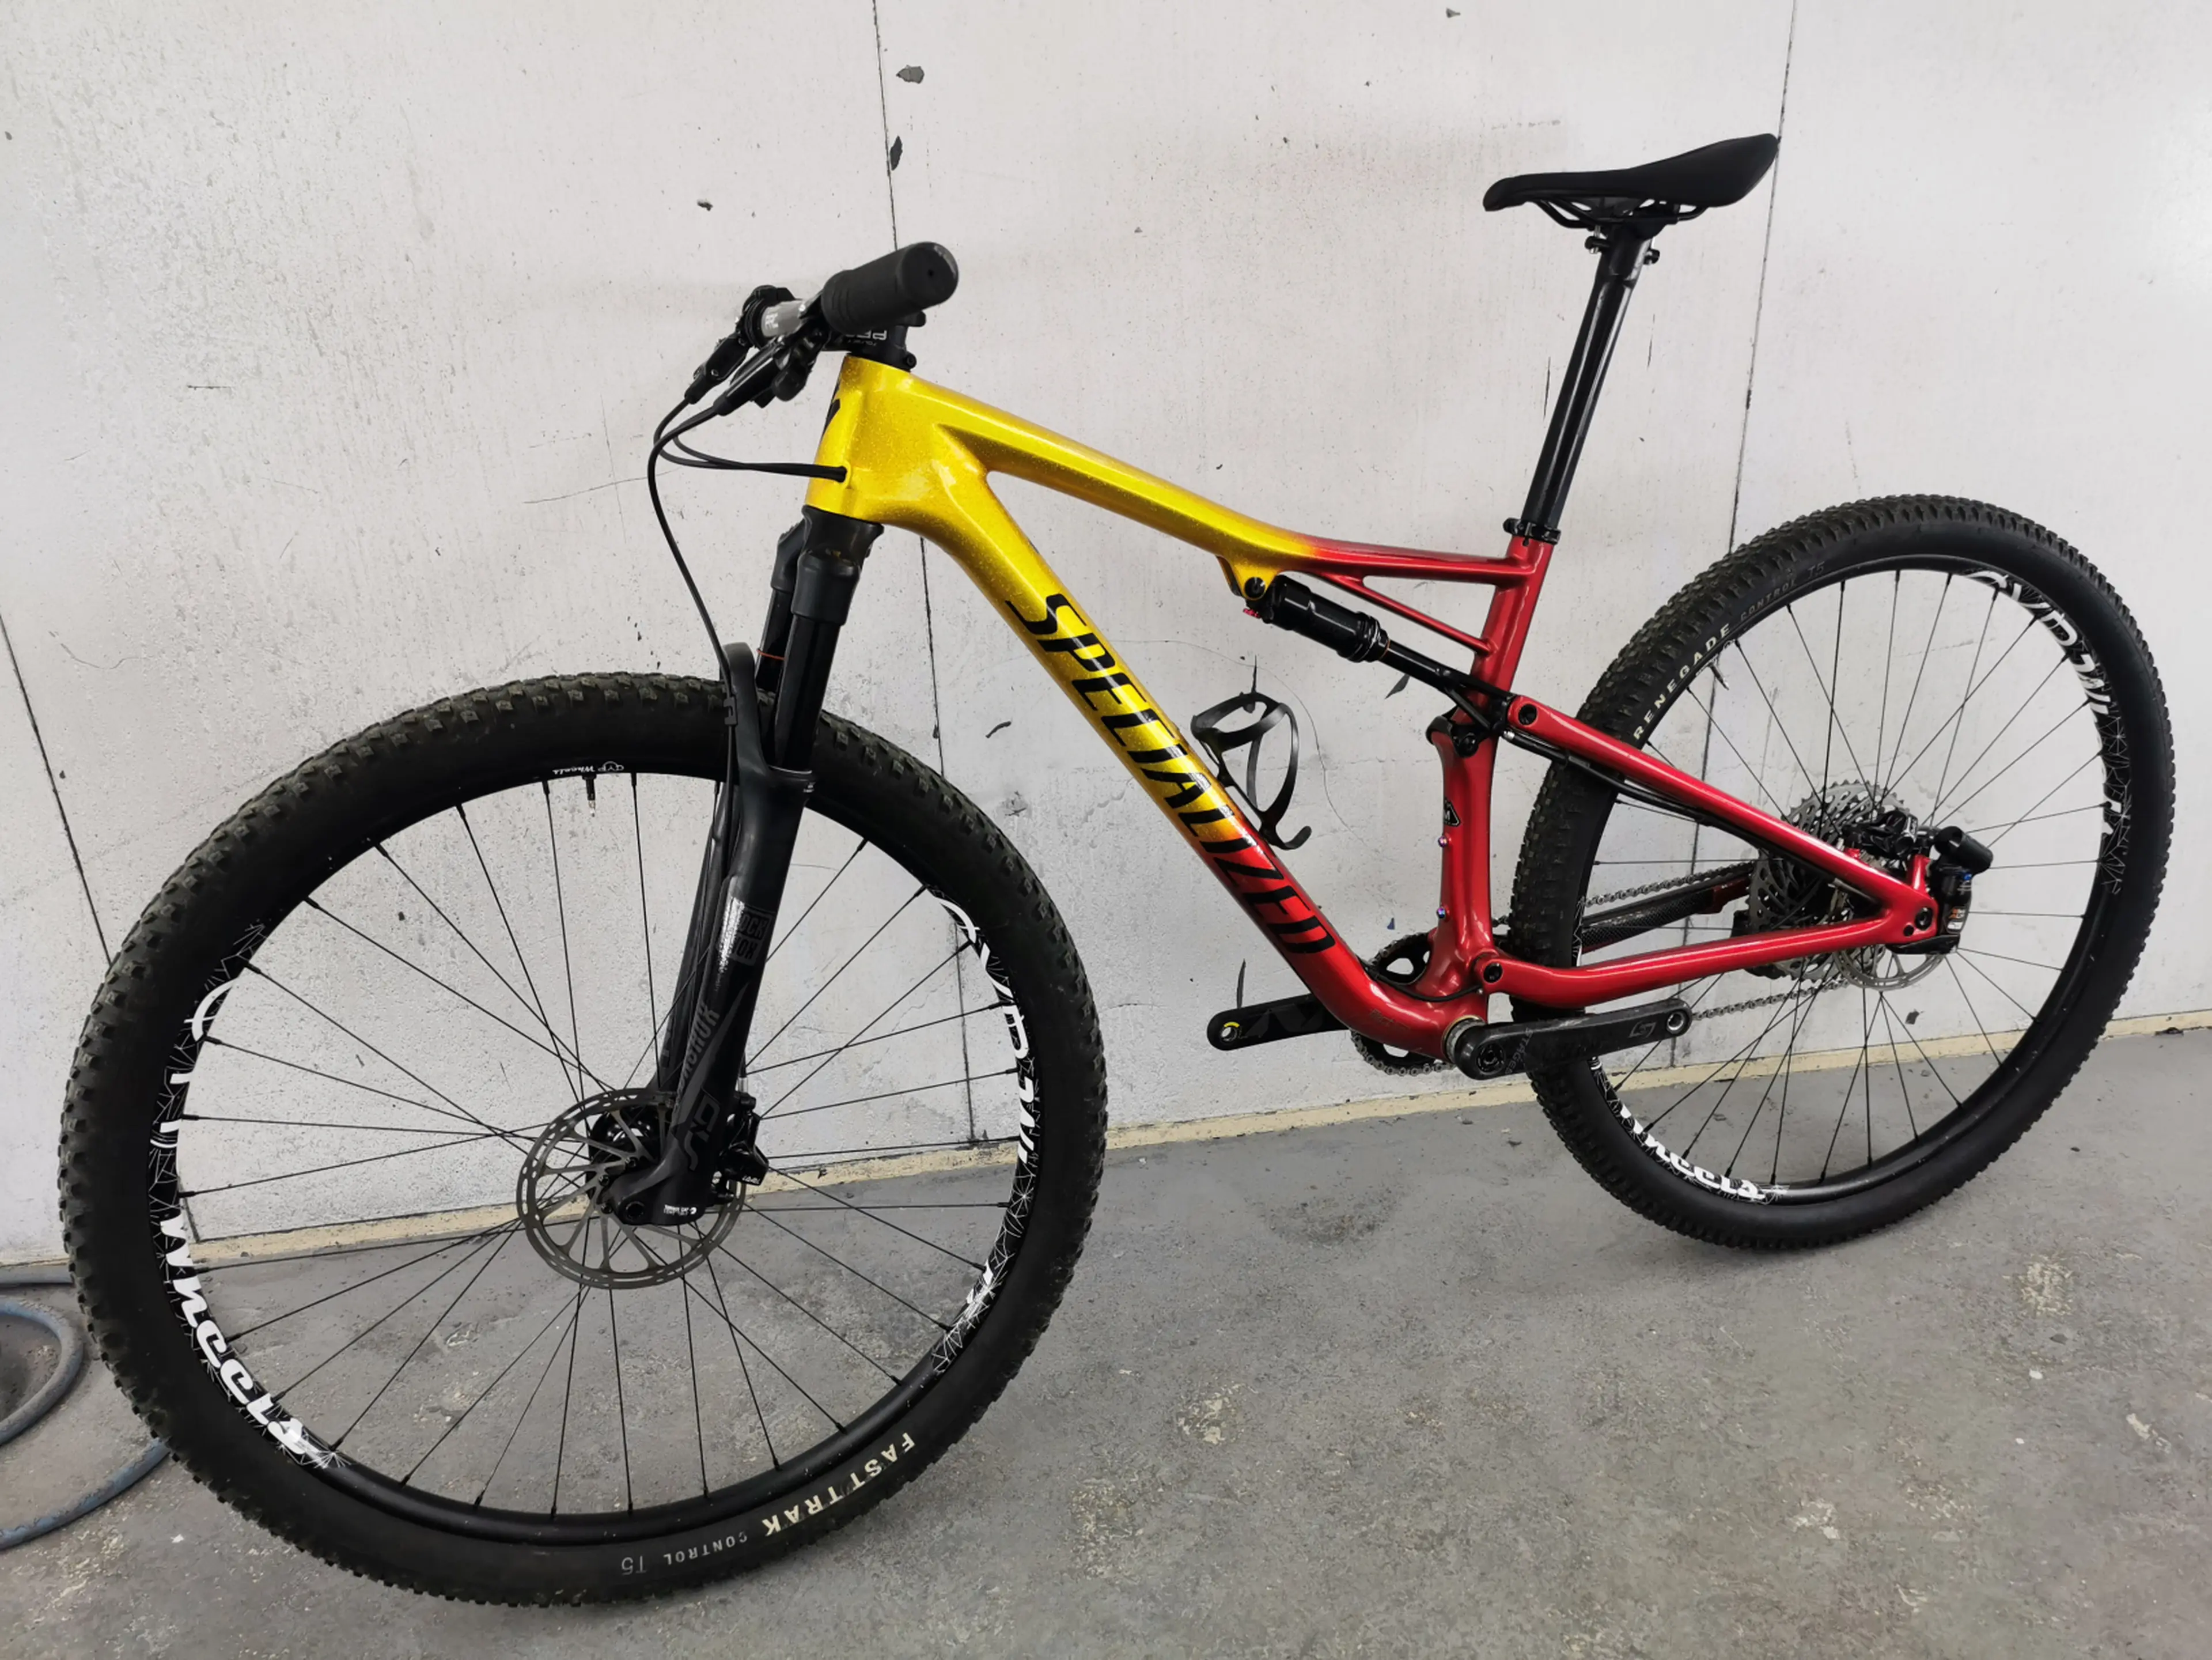 2. Specialized Epic Expert 2018